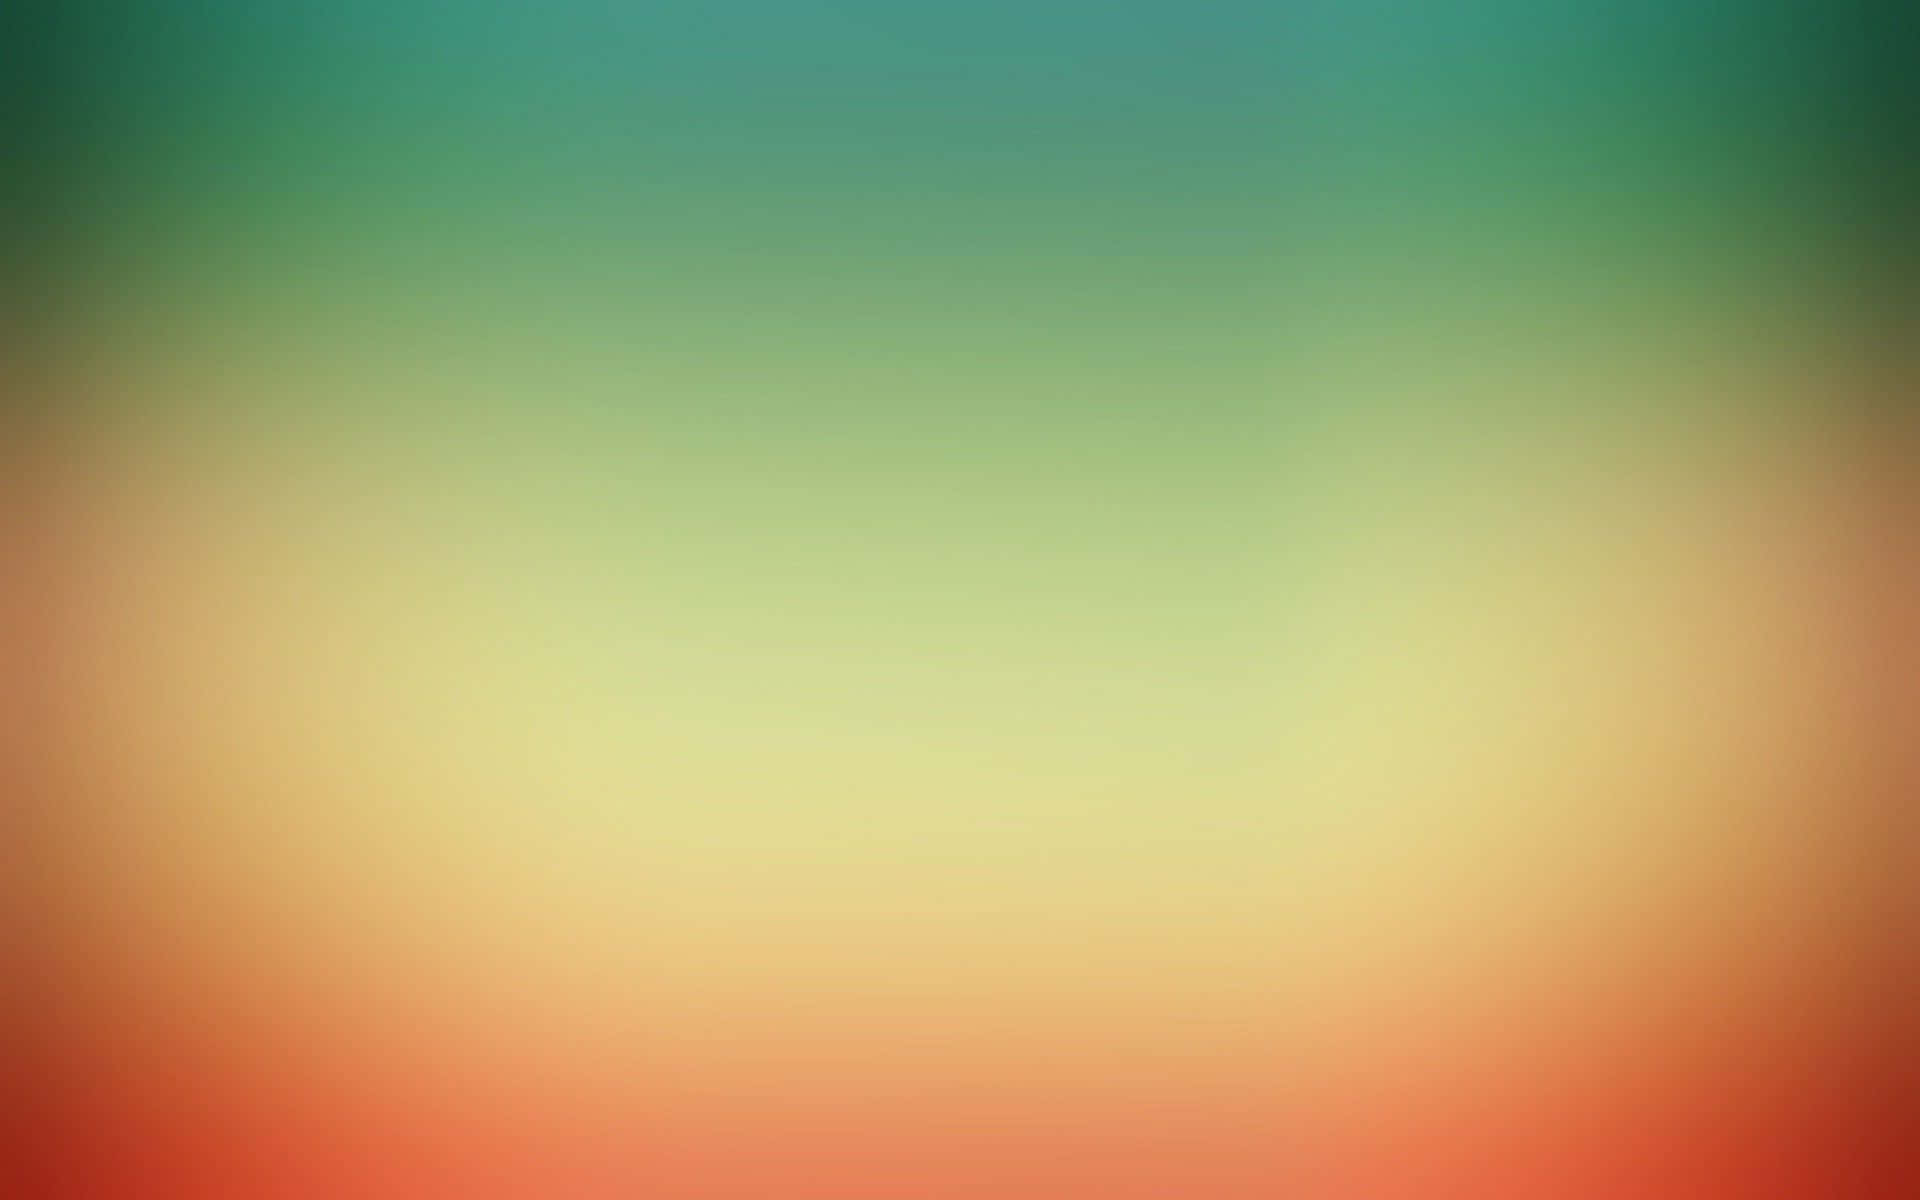 A Colorful Blurred Background With A Gradient